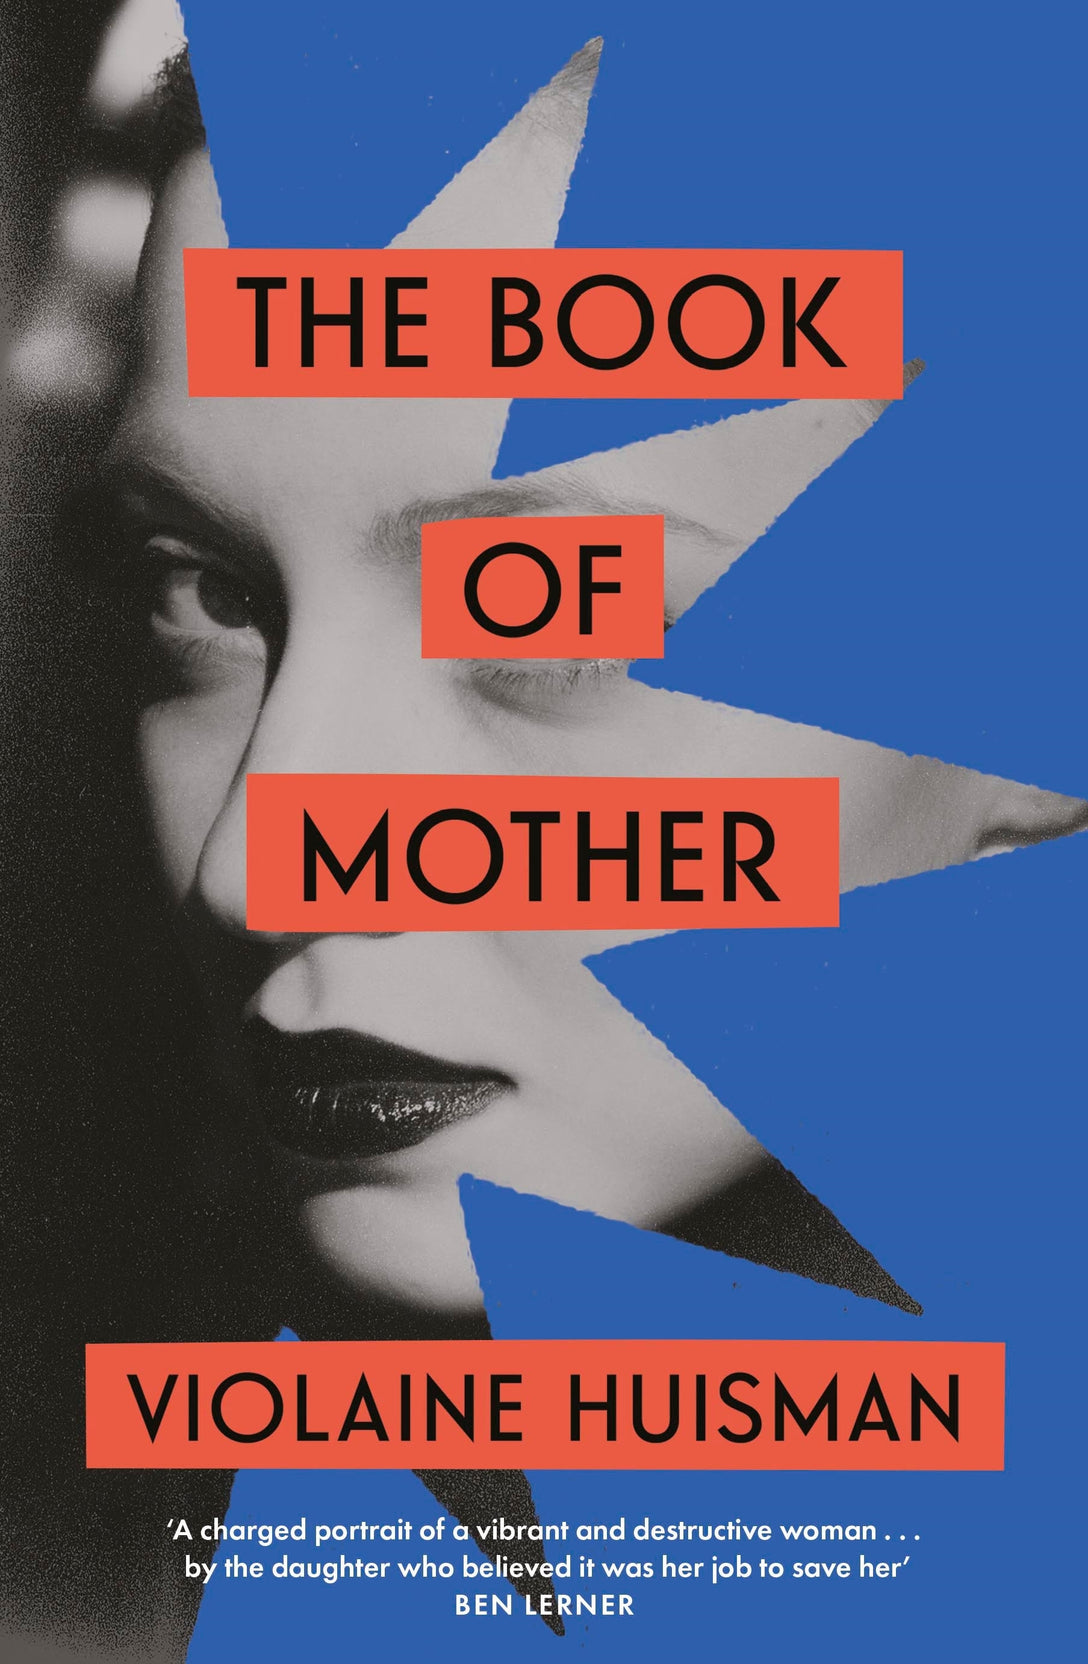 The Book of Mother by Violaine Huisman